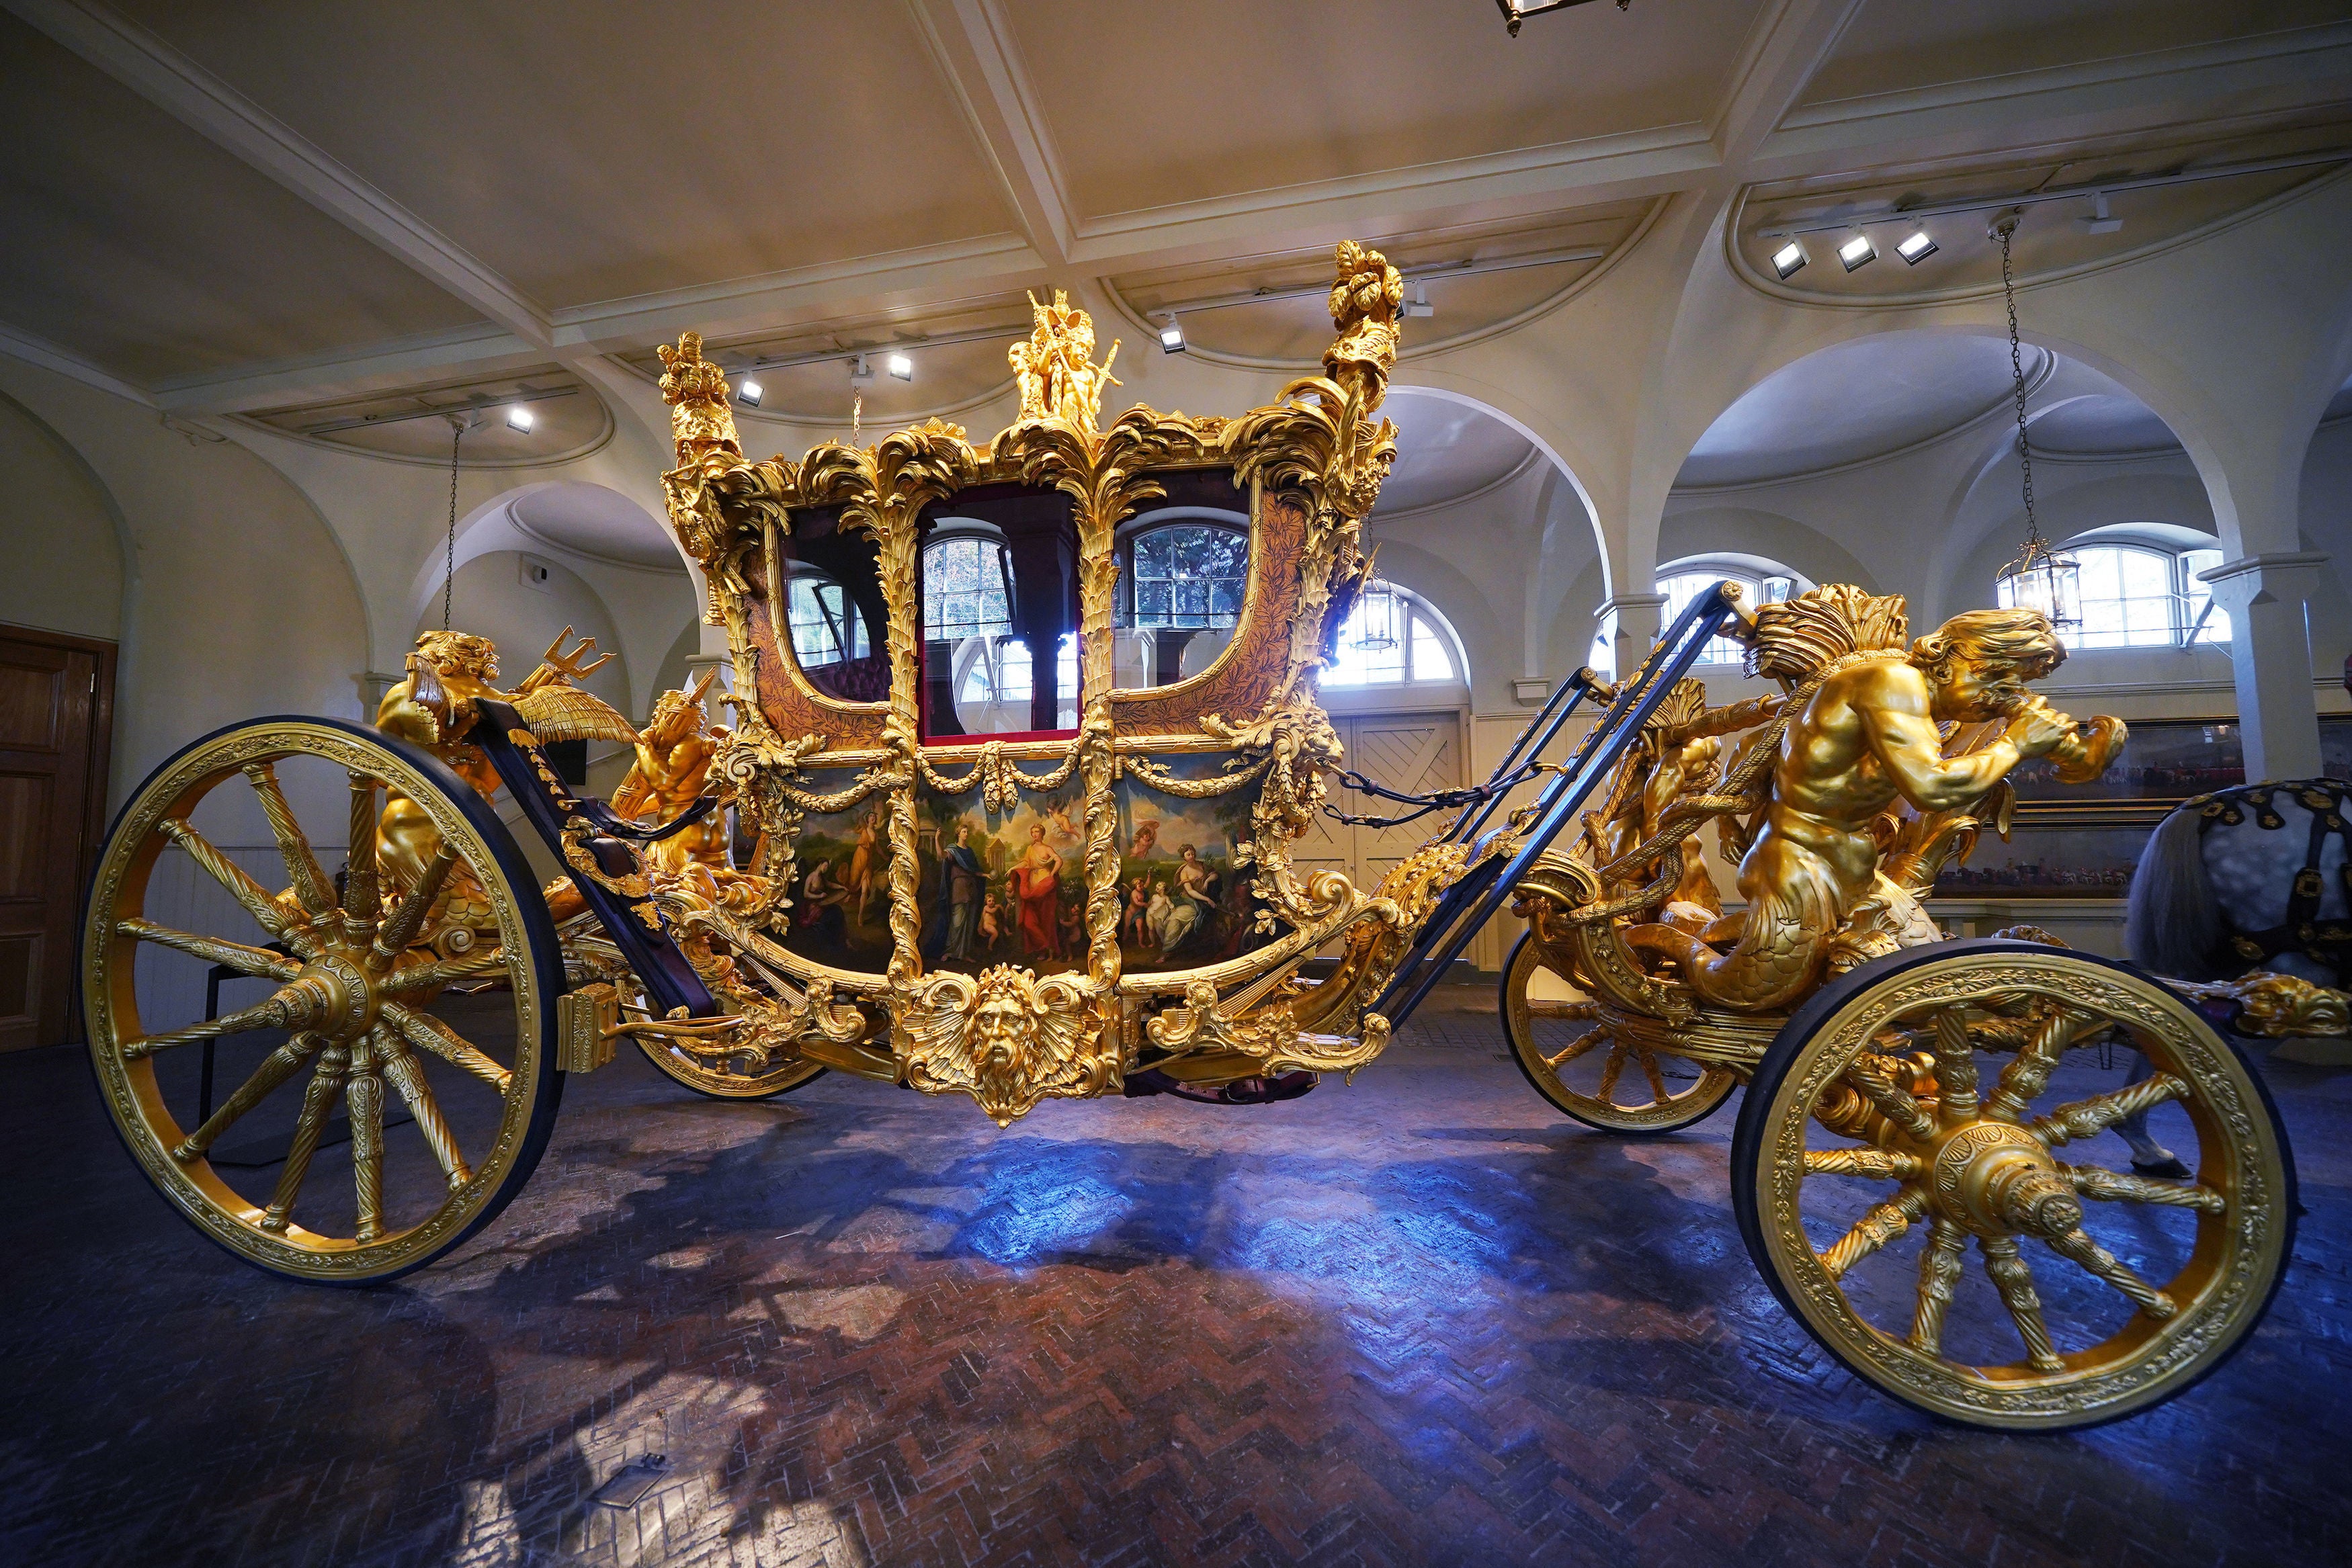 The Gold State Coach on display at the Royal Mews in Buckingham Palace, London, ahead of King Charles III’s Coronation on 6 May